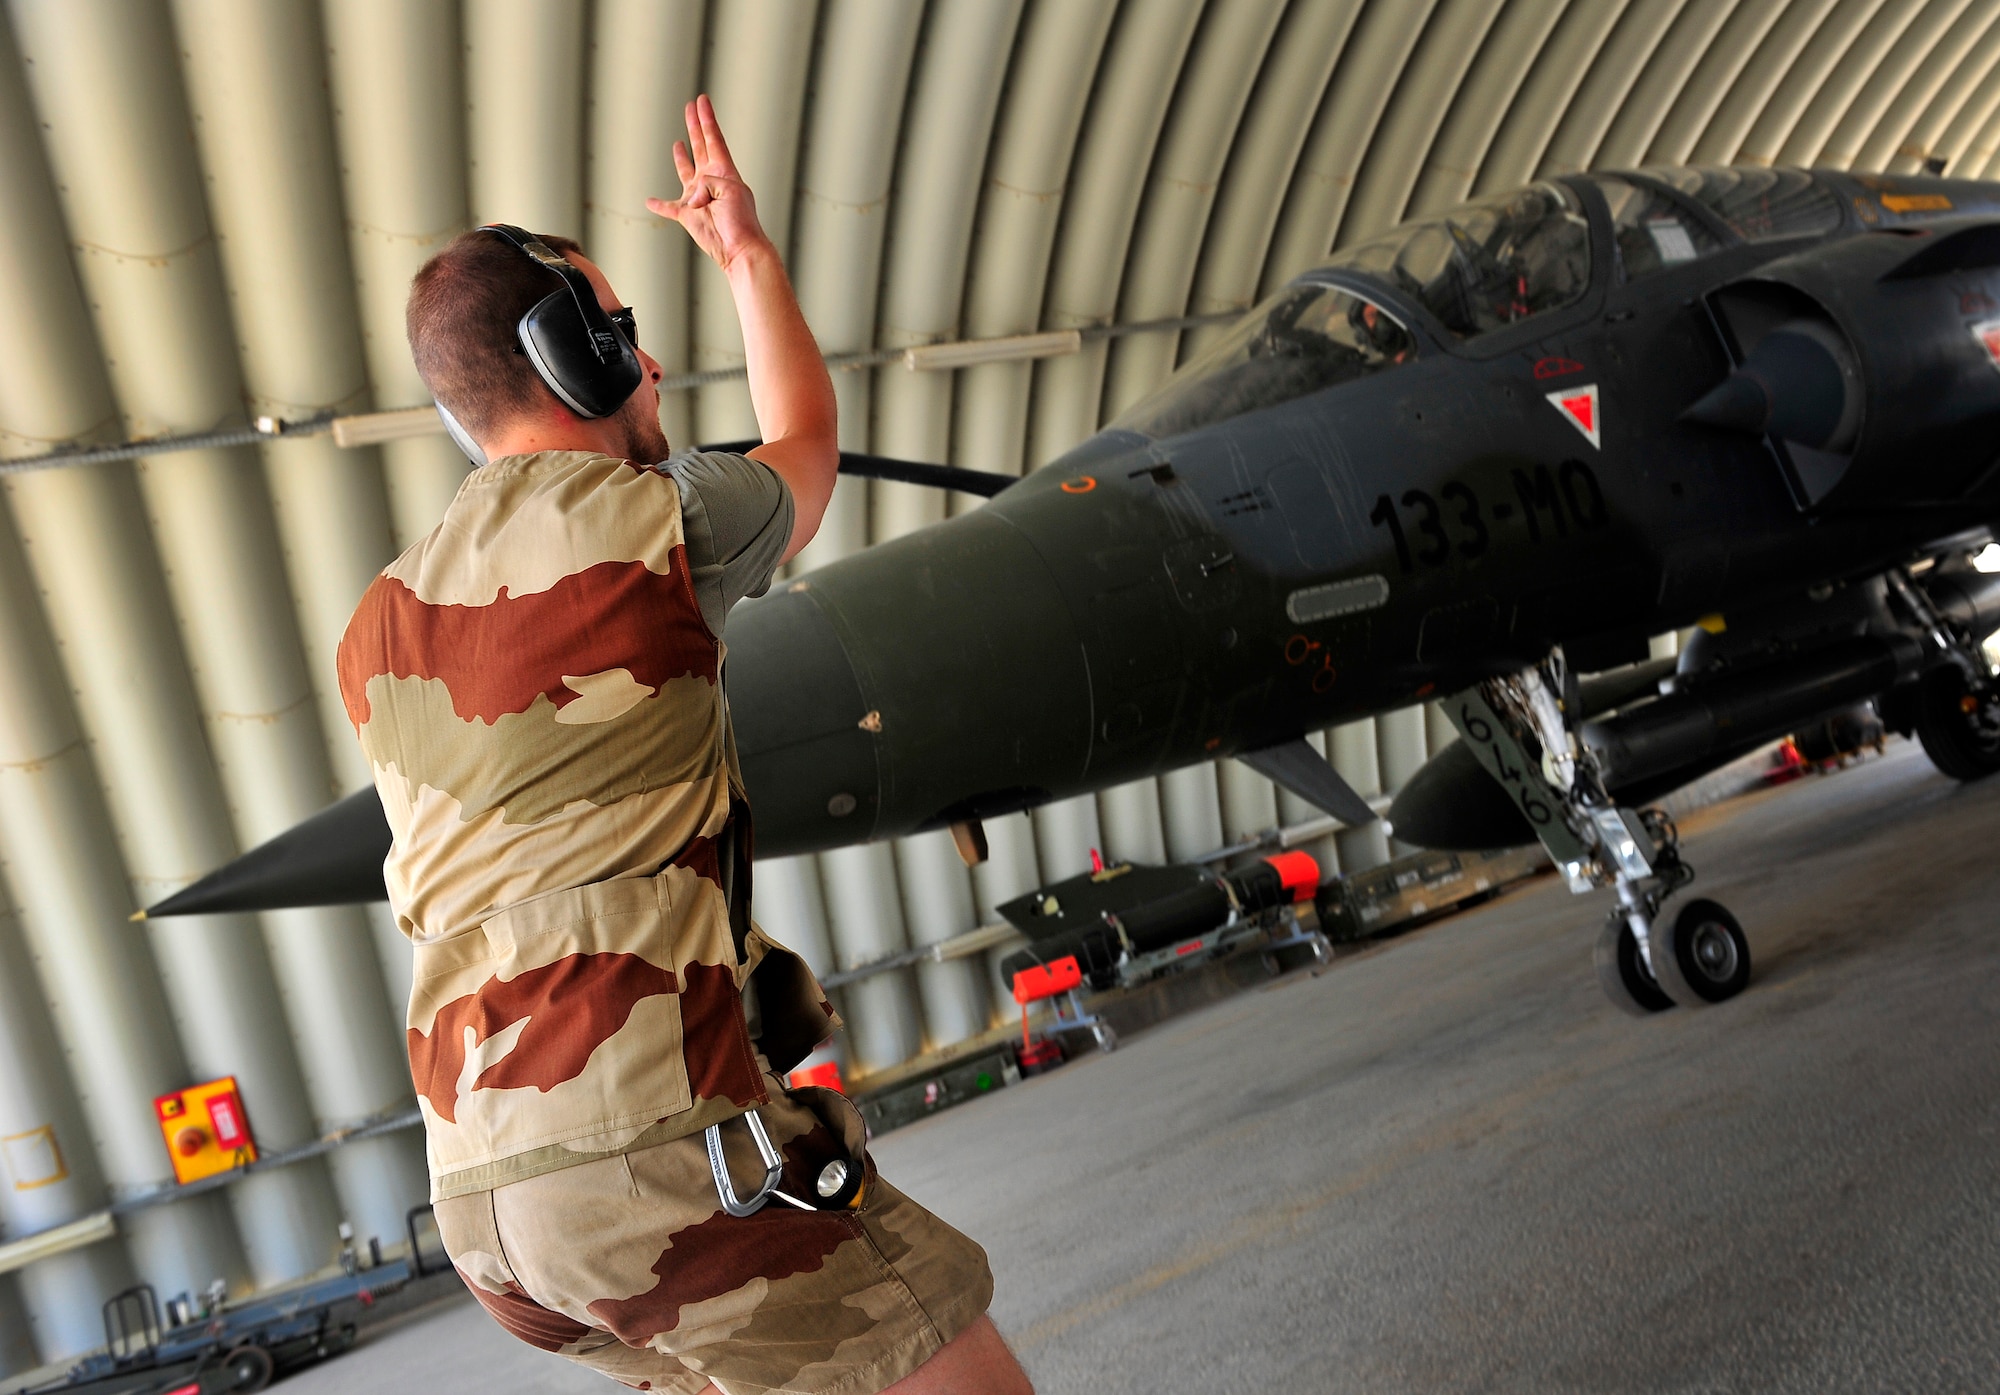 Members of the French Air Force, Detachment 3/3, perform maintenance inspections and checklists on a Mirage 2000-D before a combat mission at Kandahar Airfield, Afghanistan, June 15, 2012. The French AF has been a coalition partner with the U.S. during Operation Enduring Freedom (OEF) and perform air to ground close air support missions for friendly ground forces. (U.S. Air Force photo/Staff Sgt. Clay Lancaster)
